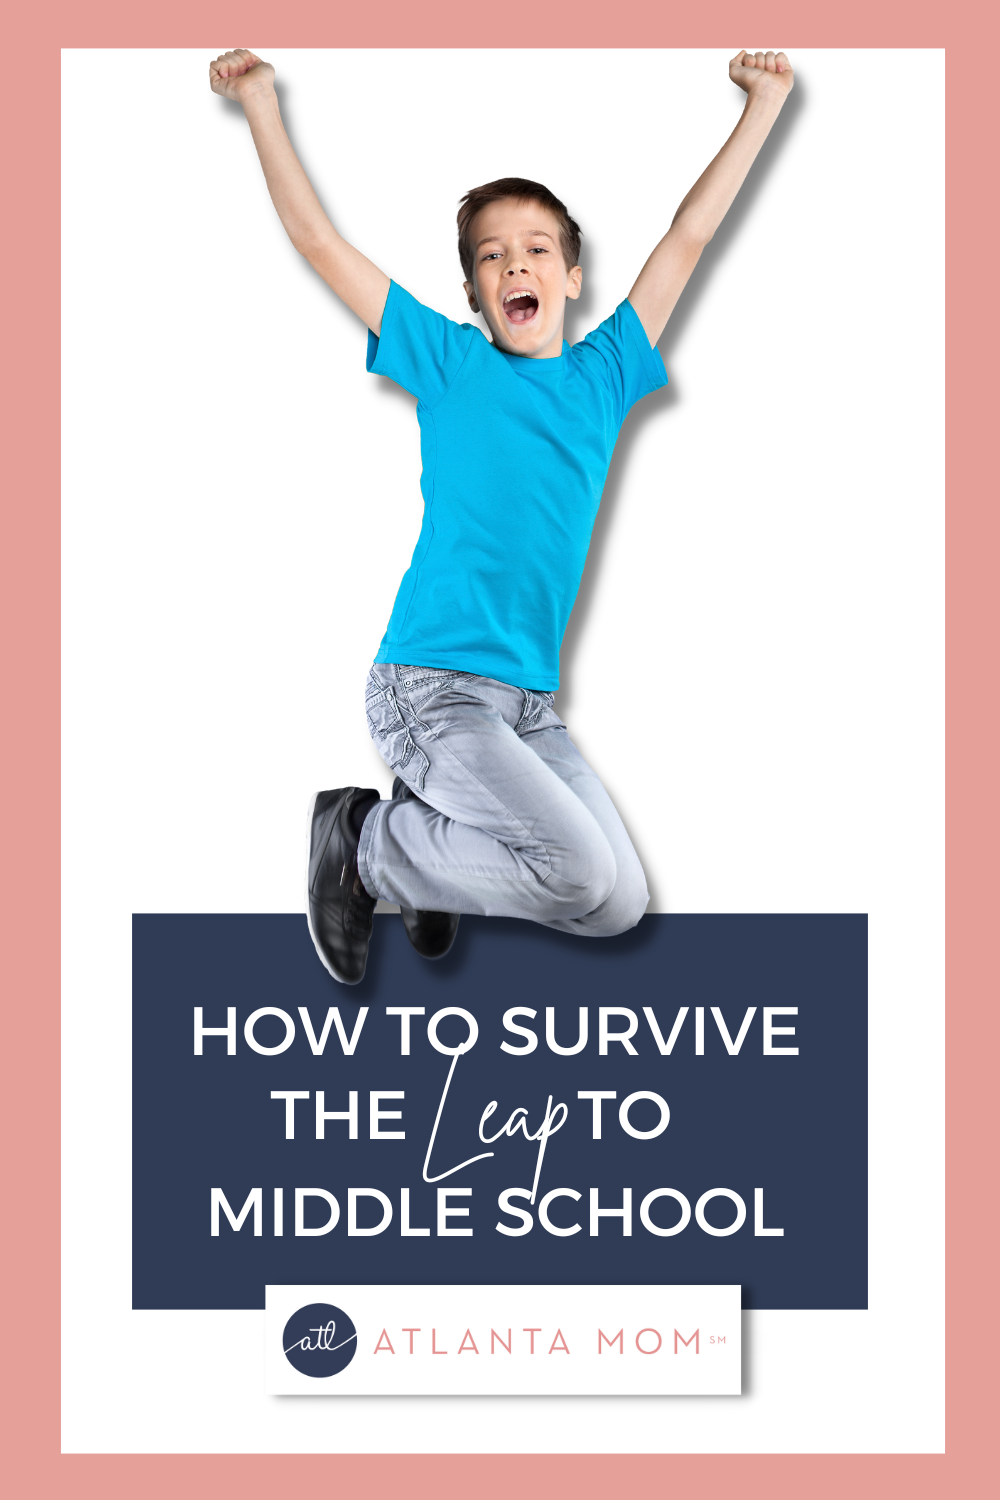 How to Survive the Leap to Middle School